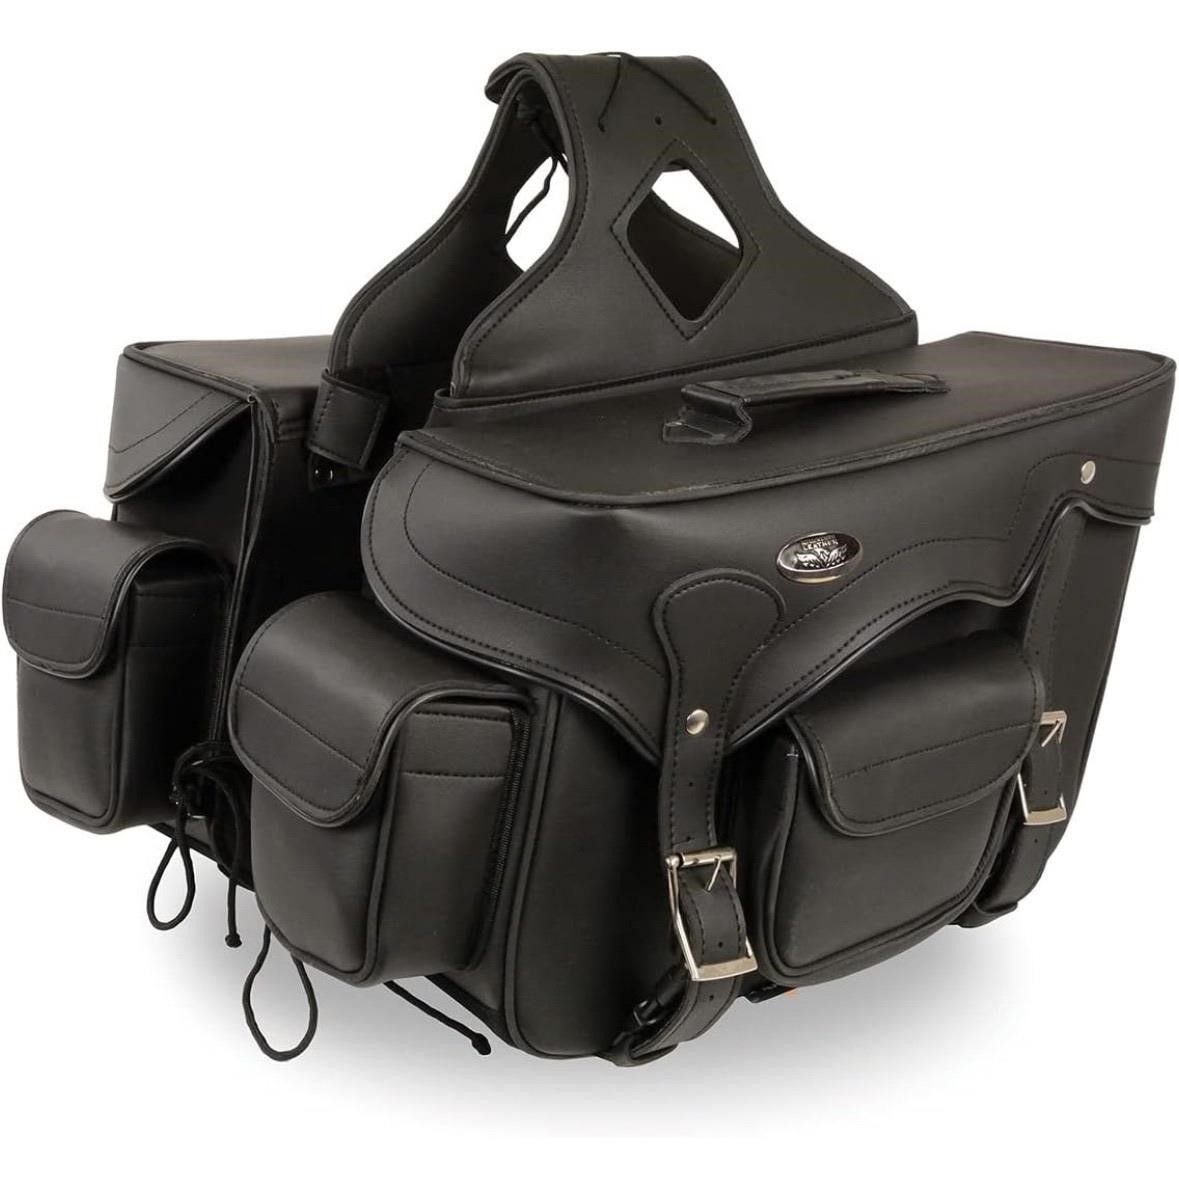 NEW $204 Milwaukee Leather Zip-off Saddle Bags